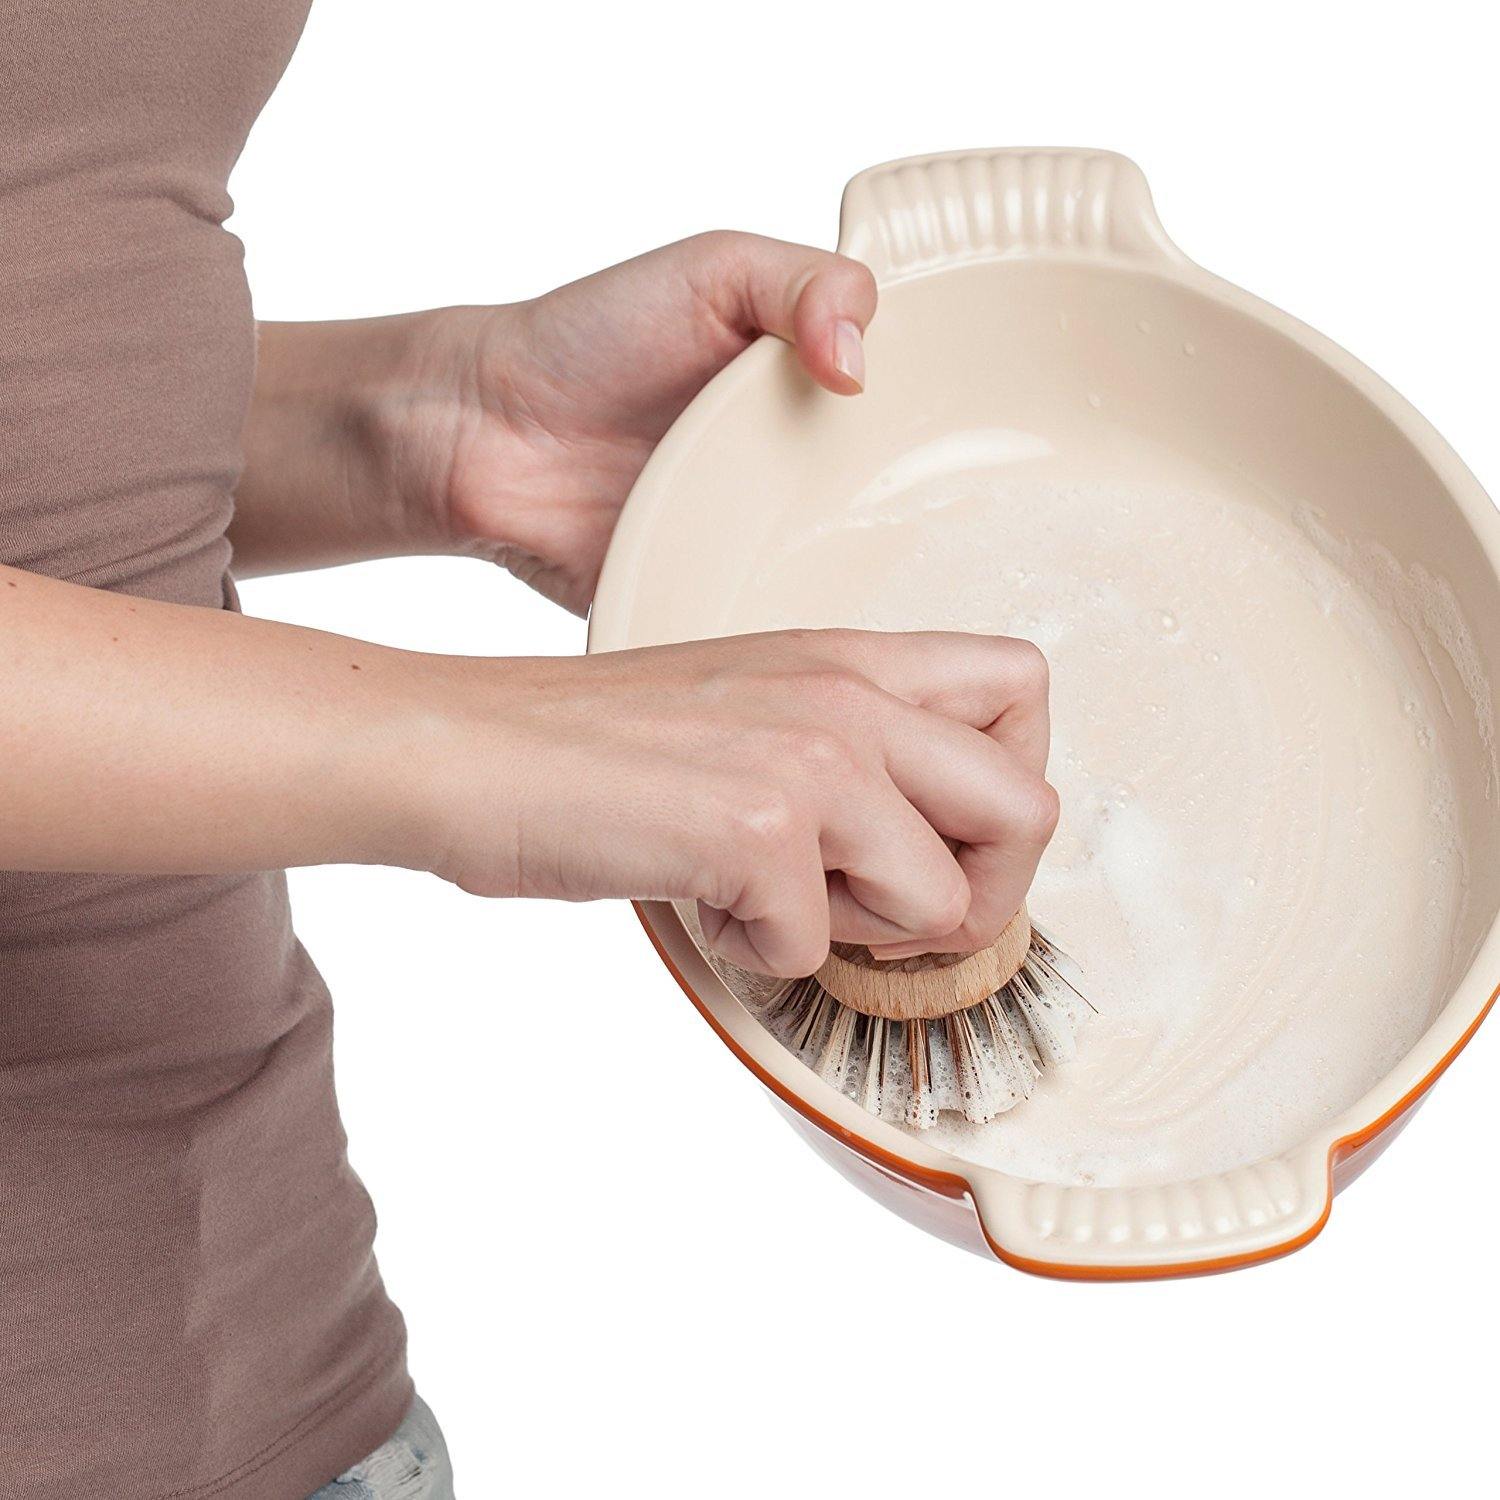 woman scrubbing a pot with the wooden pot brush.